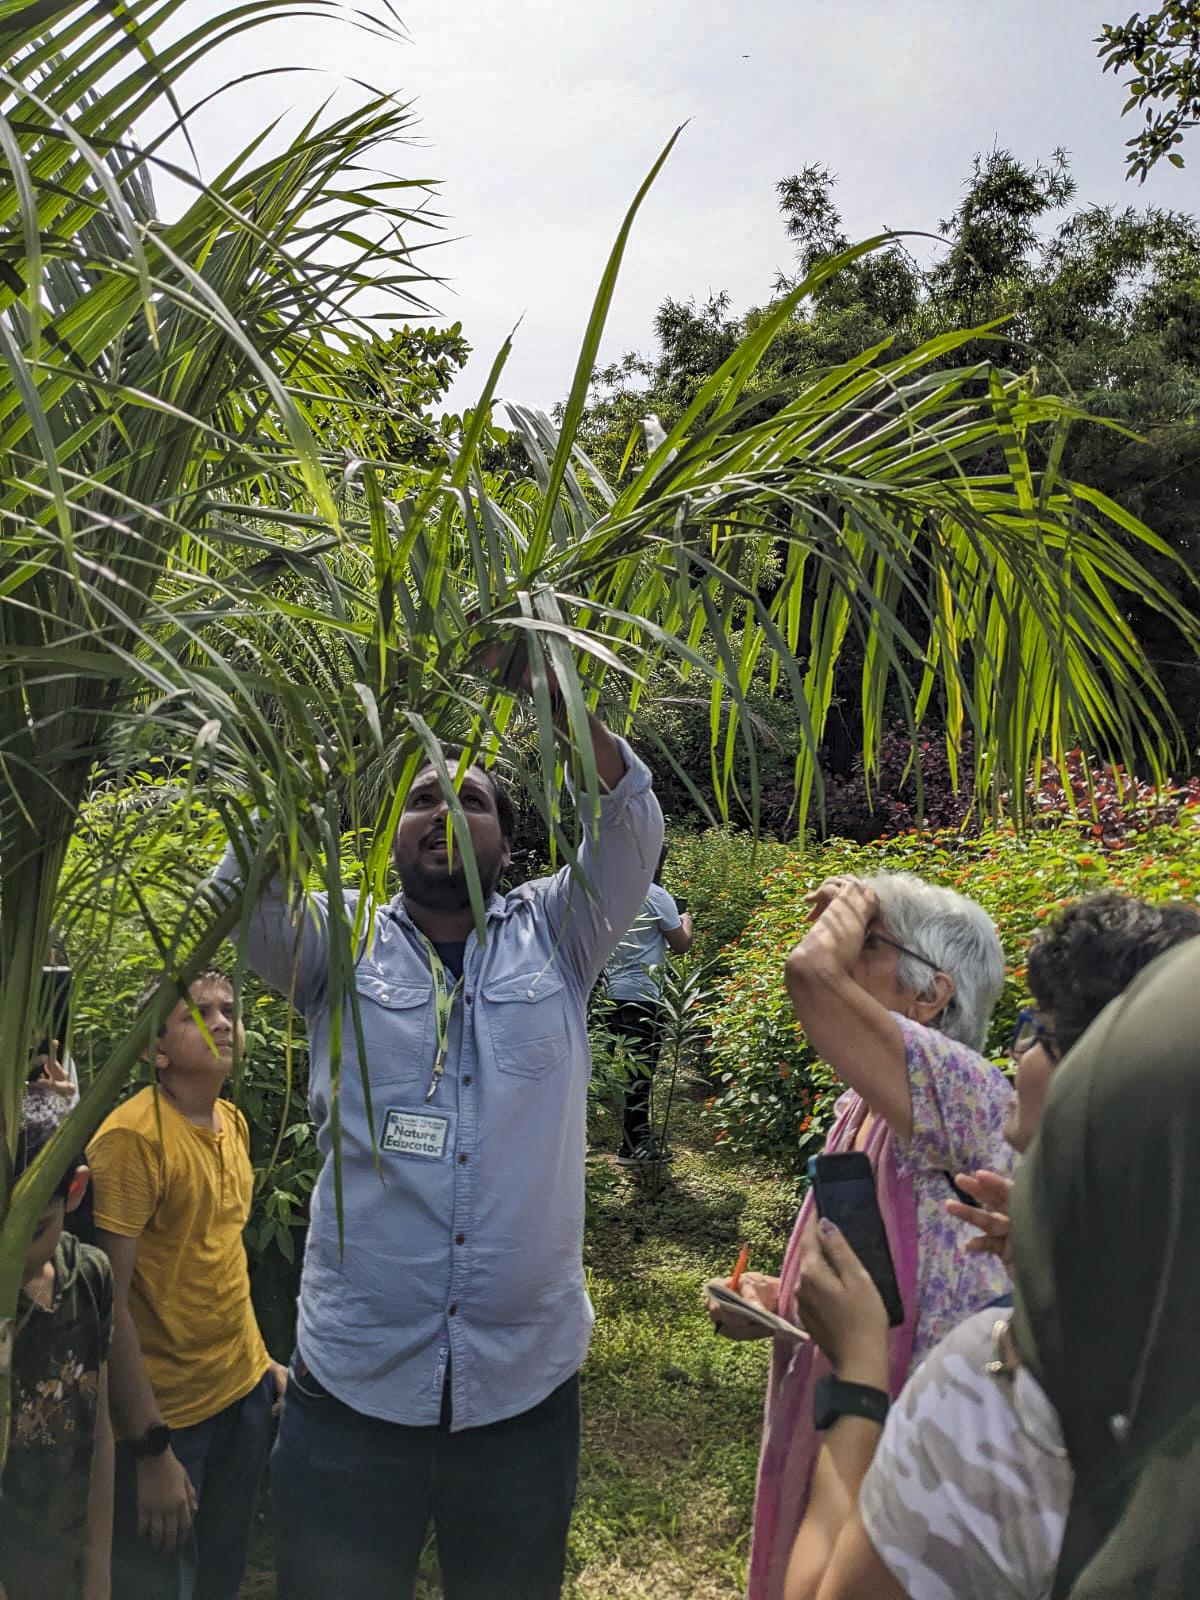 A group looks on as Sachine Rane, of the NGO Naturalist, examines a palm tree for caterpillars and pupae, at the Maharashtra Nature Park, Mumbai, on September 10, 2023